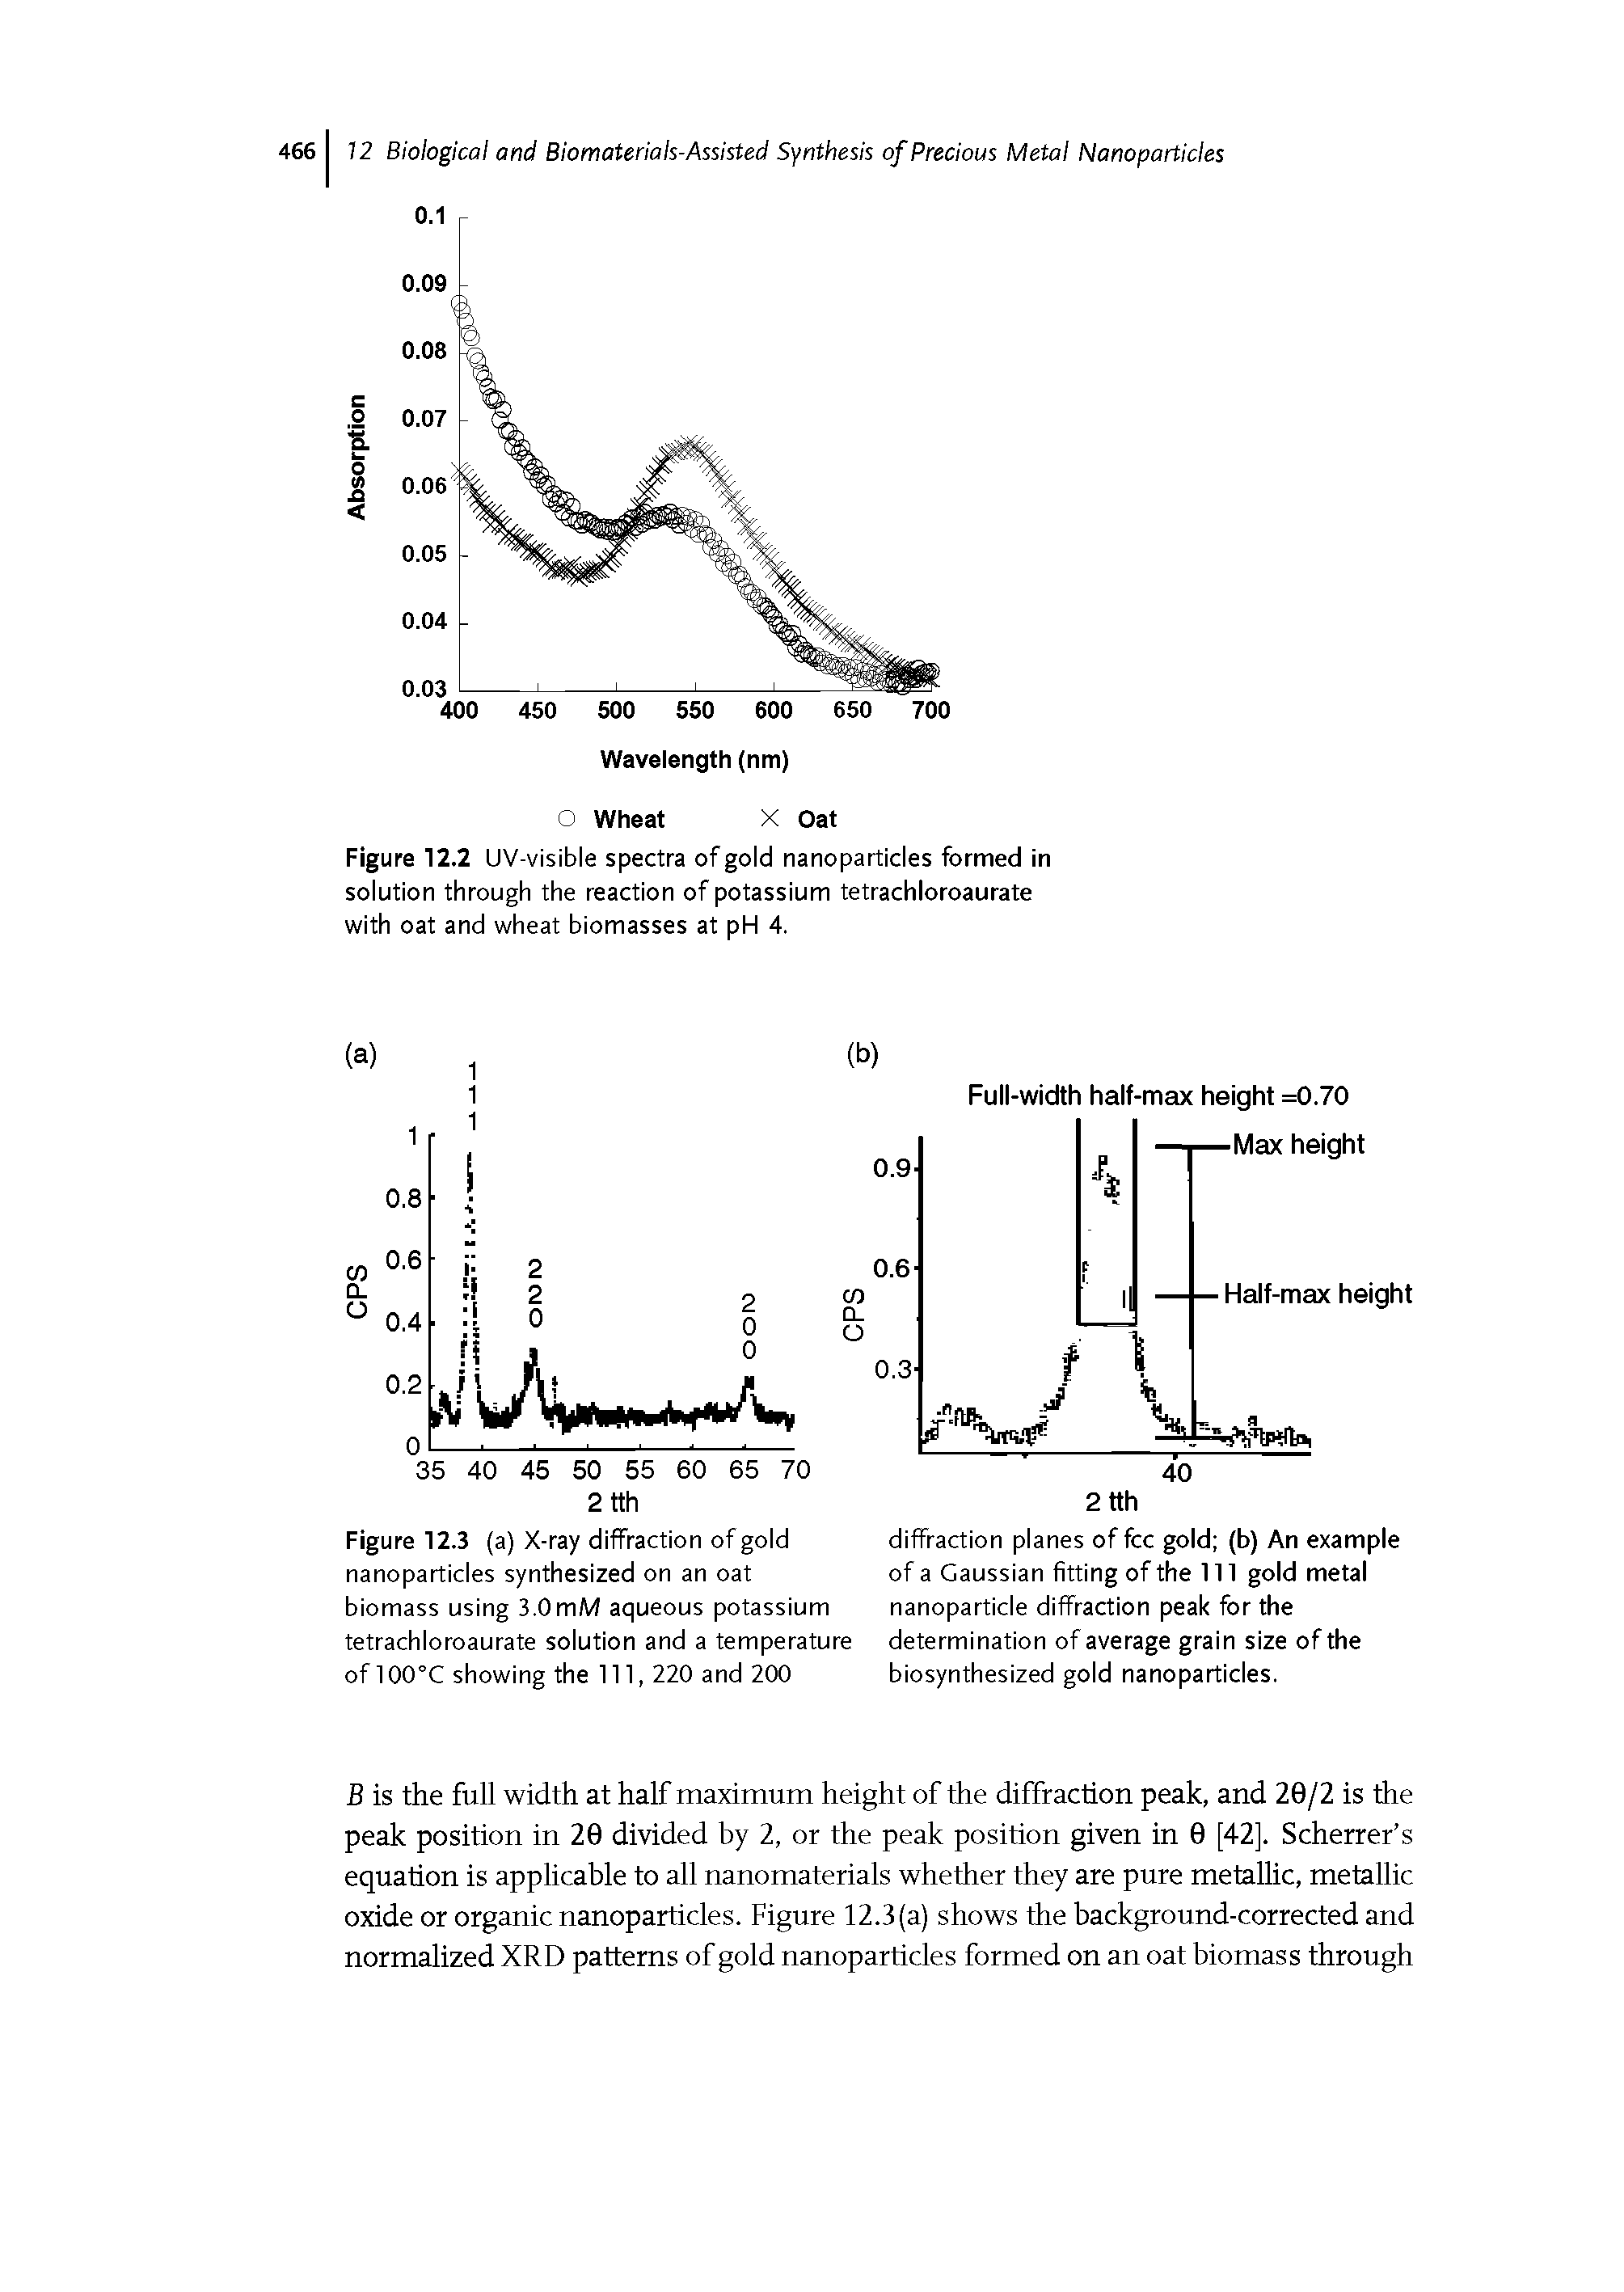 Figure 12.2 UV-visible spectra of gold nanoparticles formed in solution through the reaction of potassium tetrachloroaurate with oat and wheat biomasses at pH 4.